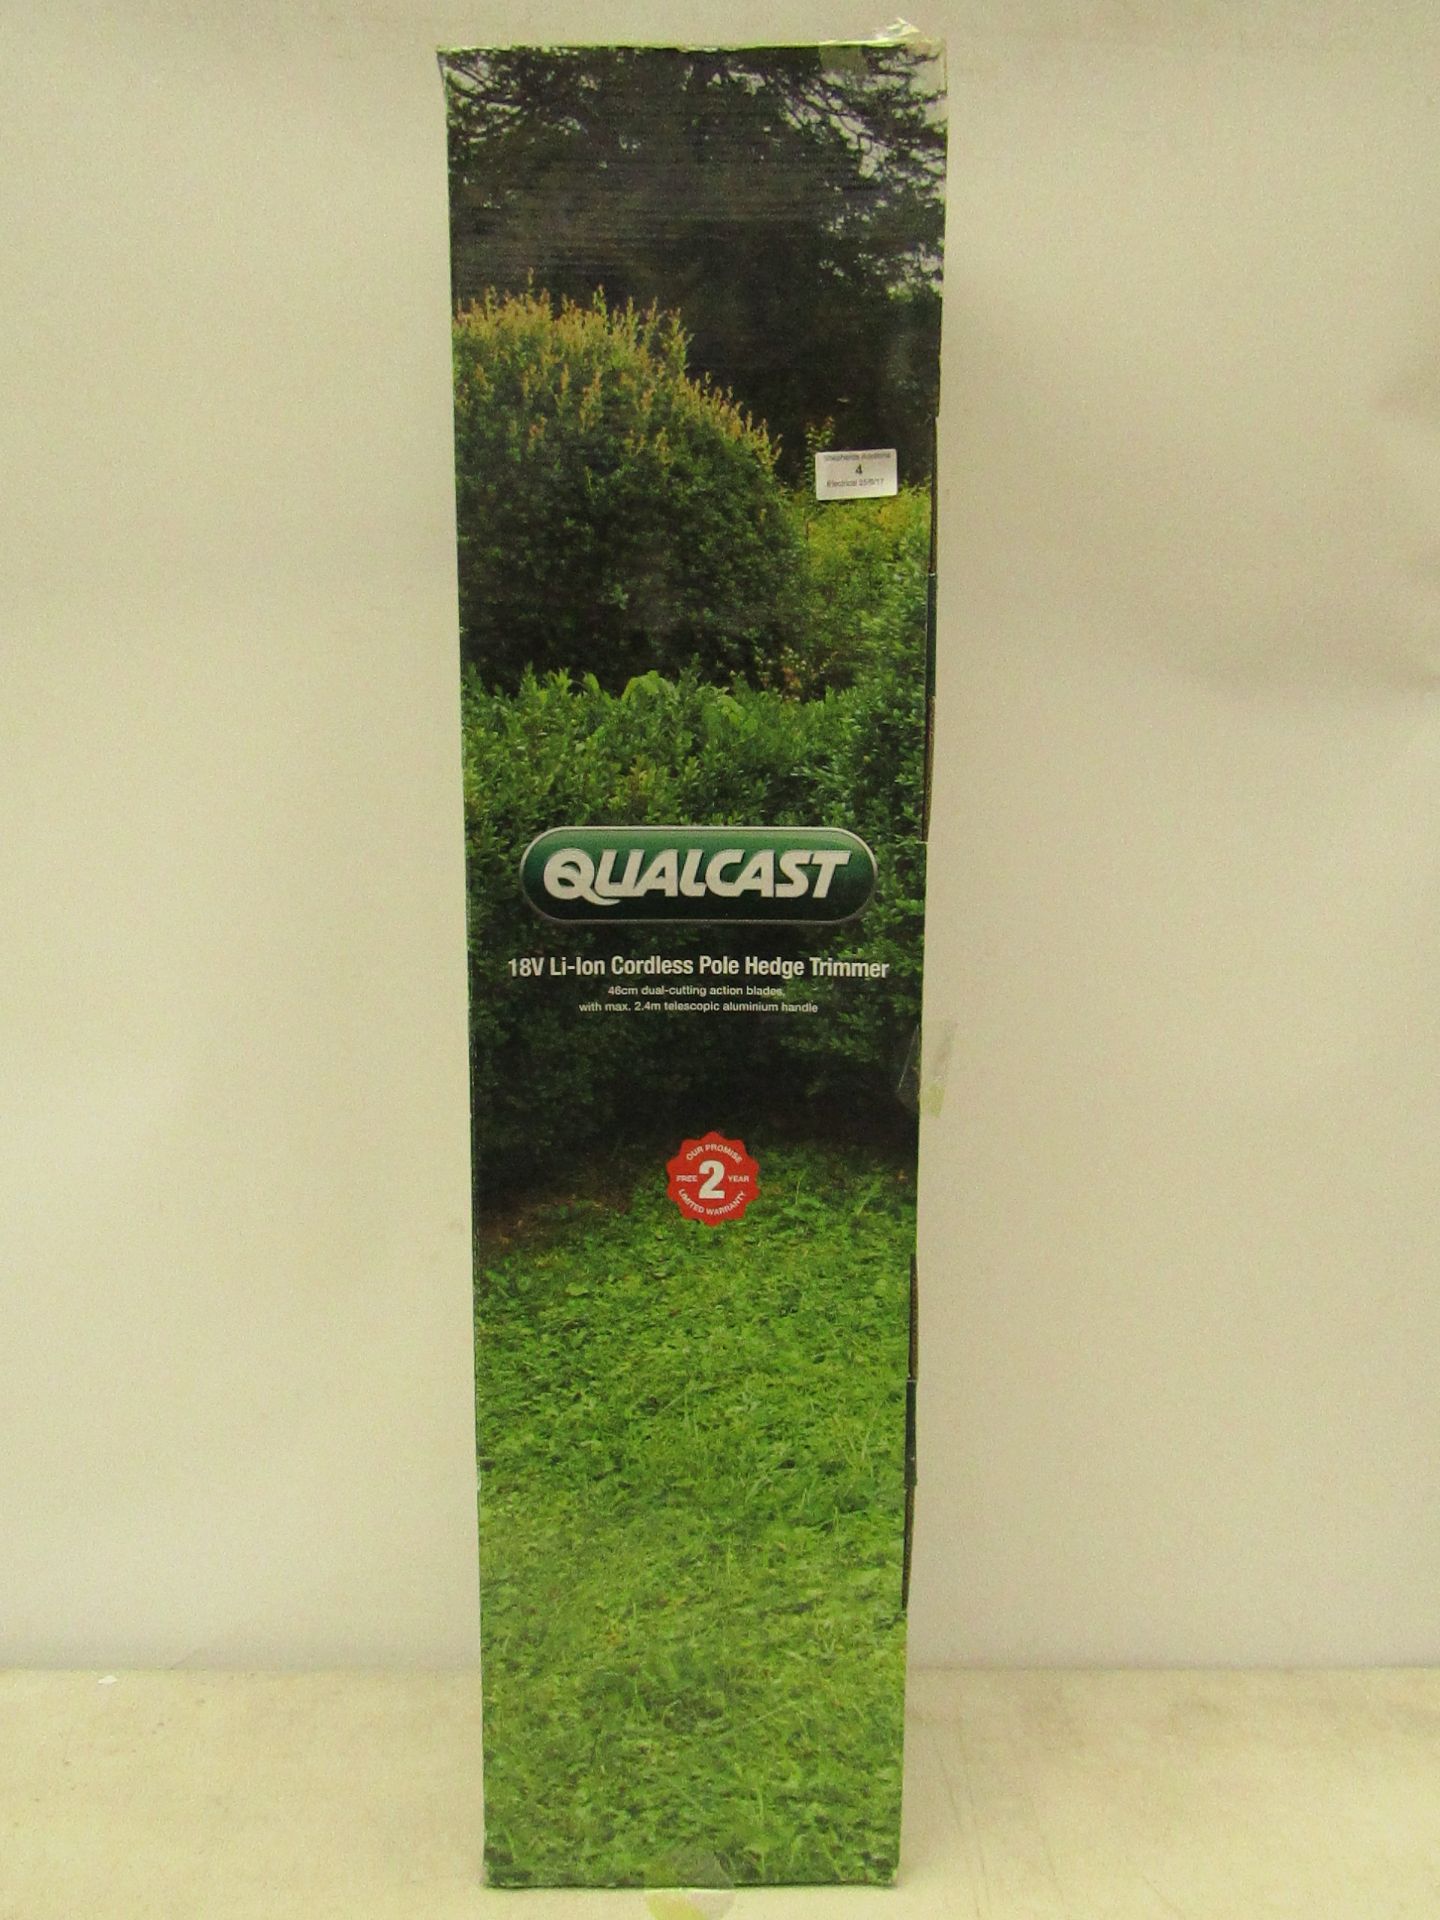 Qualcast 18v li-ion cordless pole hedge trimmer, tested working and boxed but requires battery.